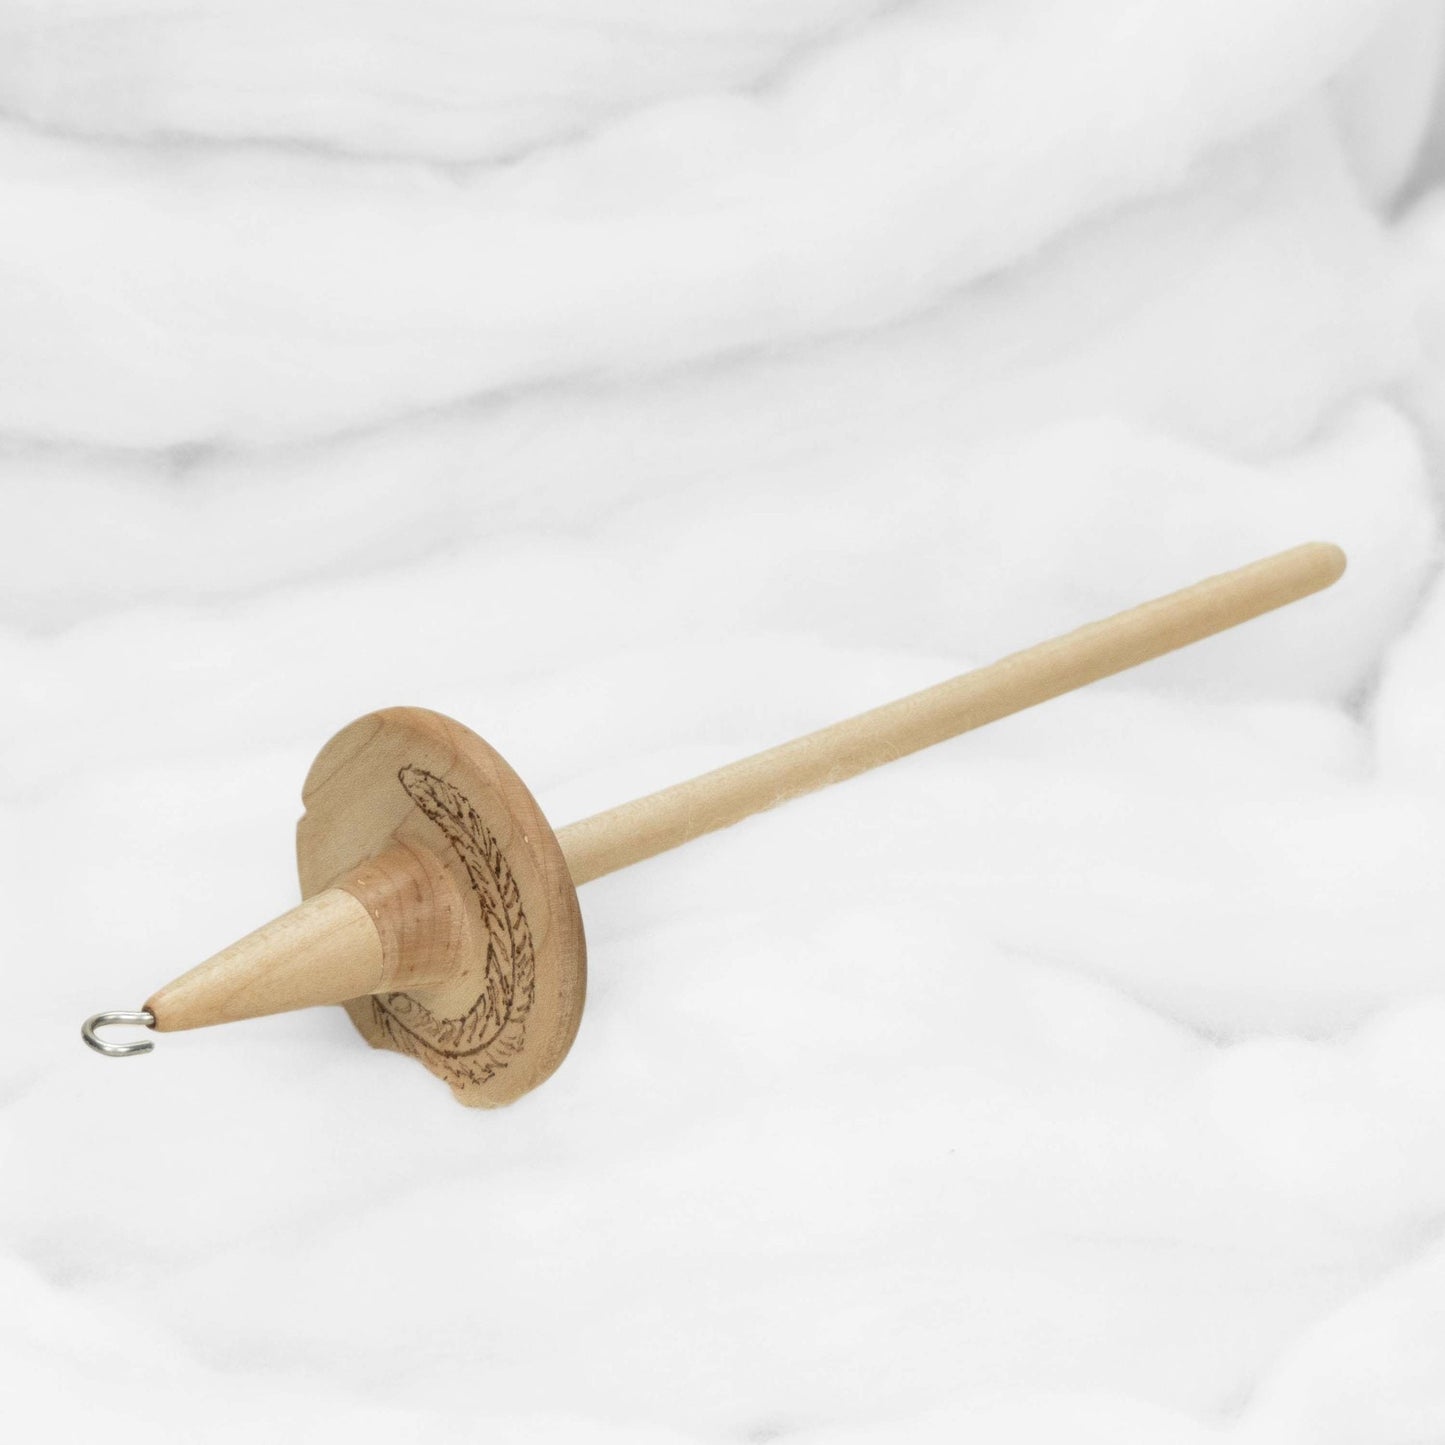 Feather - Llina Hand-Turned Maple Wood Pyrograph Drop Spindle Lightweight Top Whorl 14 Grams